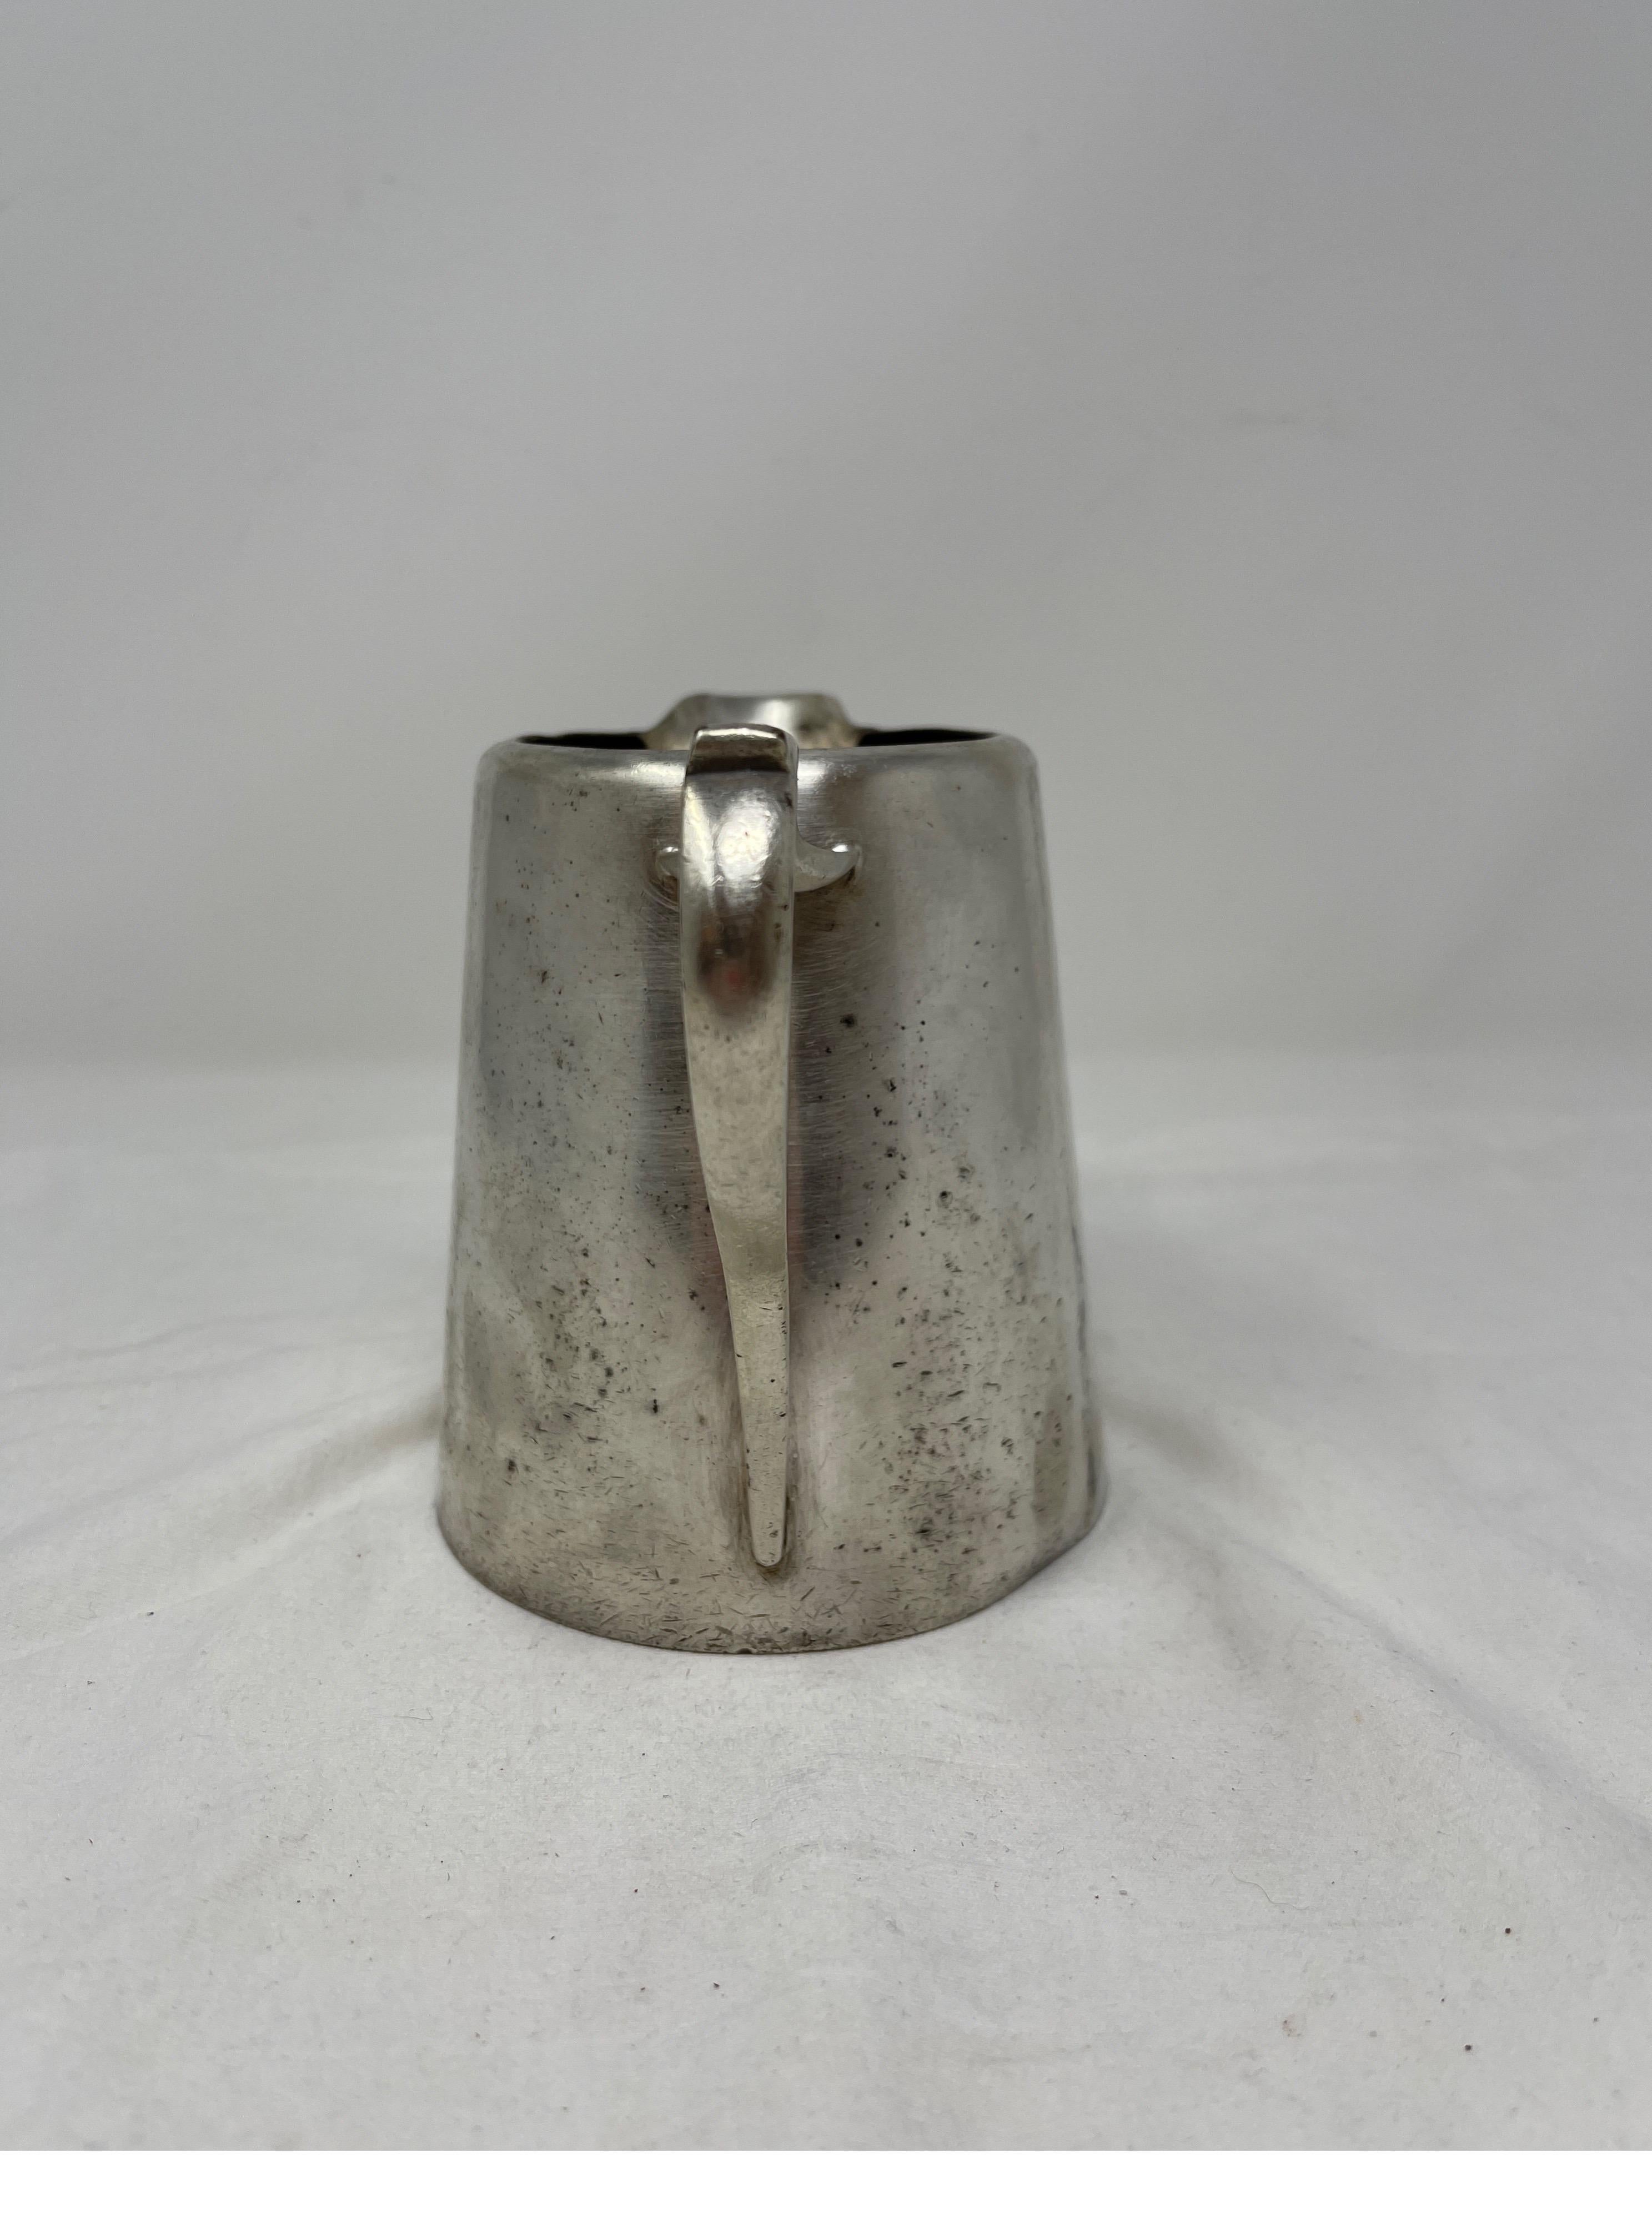 Use this 19th century hotel silver pitcher in any tea set or for fresh cut flowers. 
Measures: 5